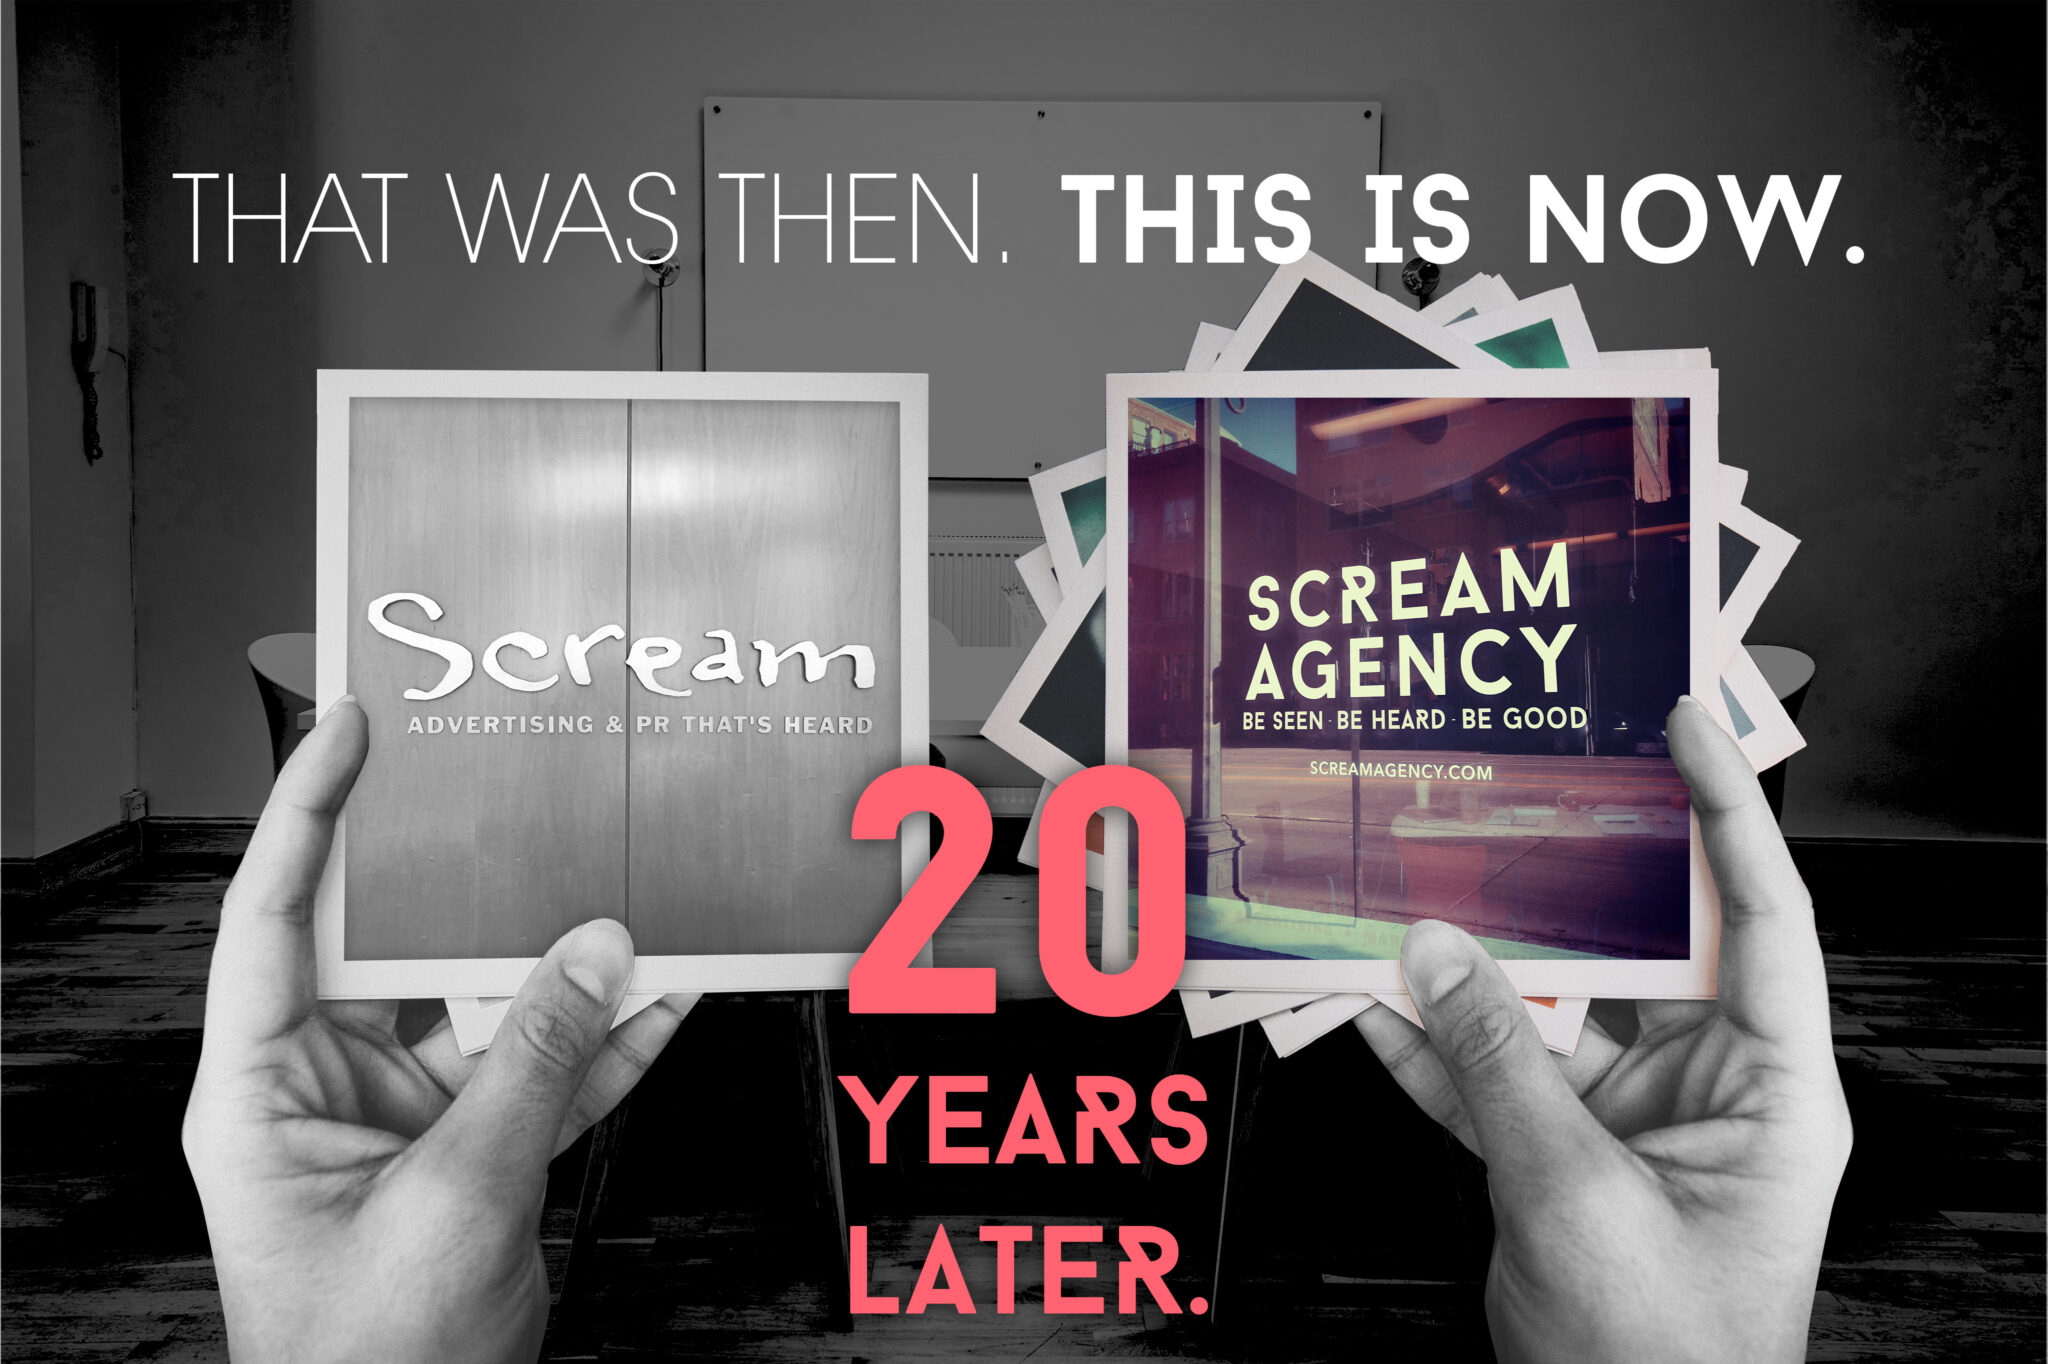 Scream Agency Celebrates 20 Years with a New Focus: Being Good